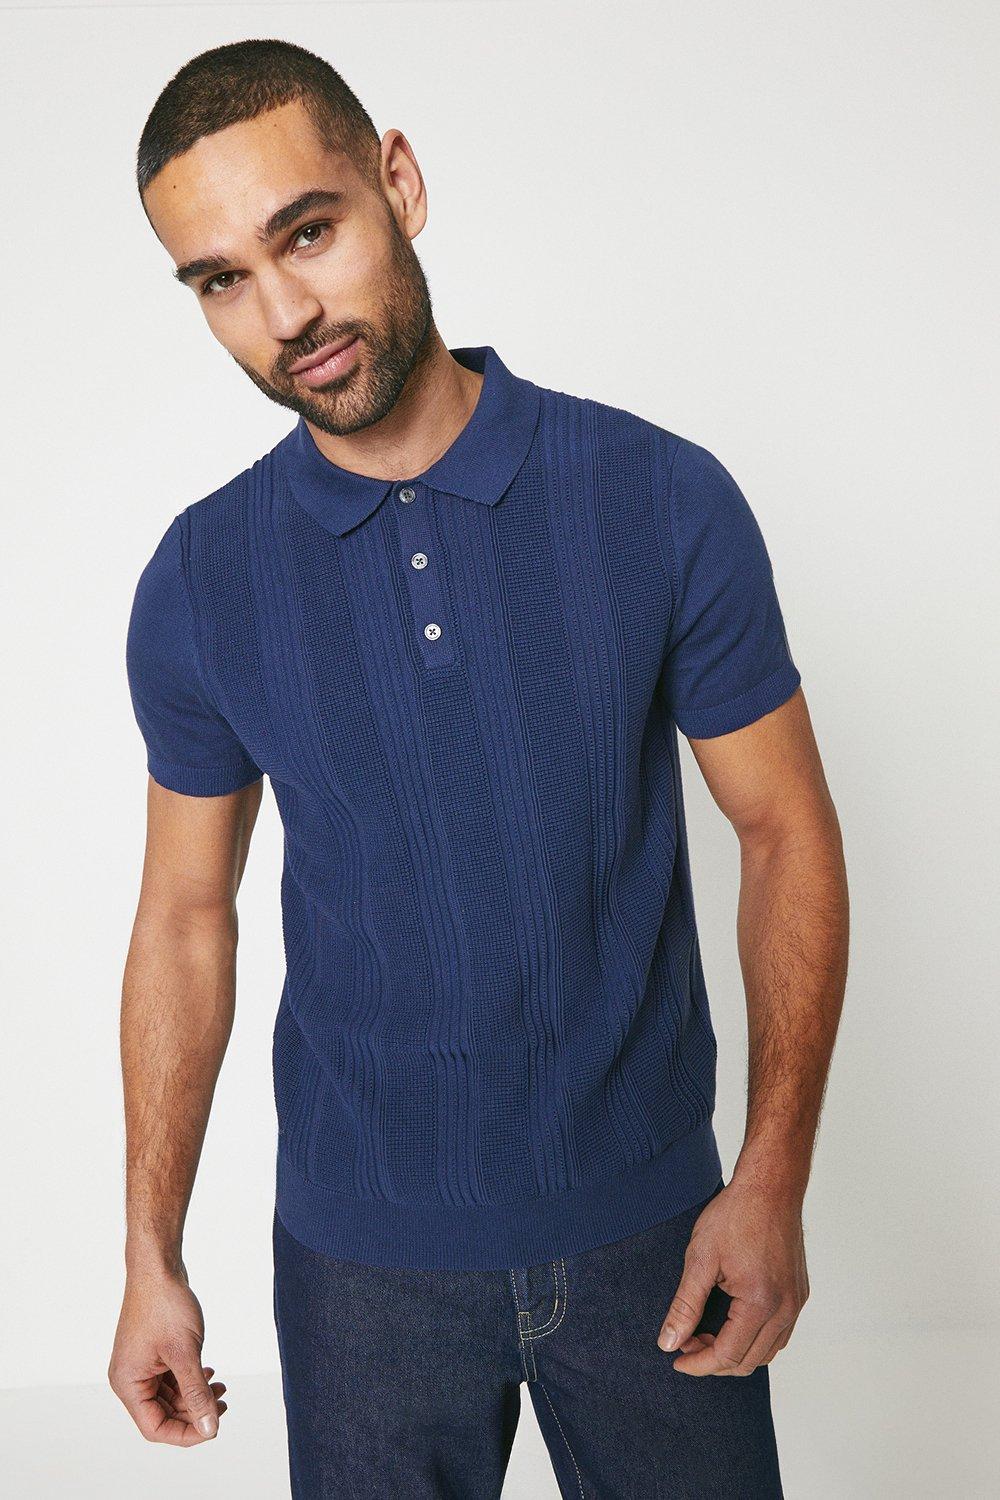 Mens Open Stitch Knitted Polo